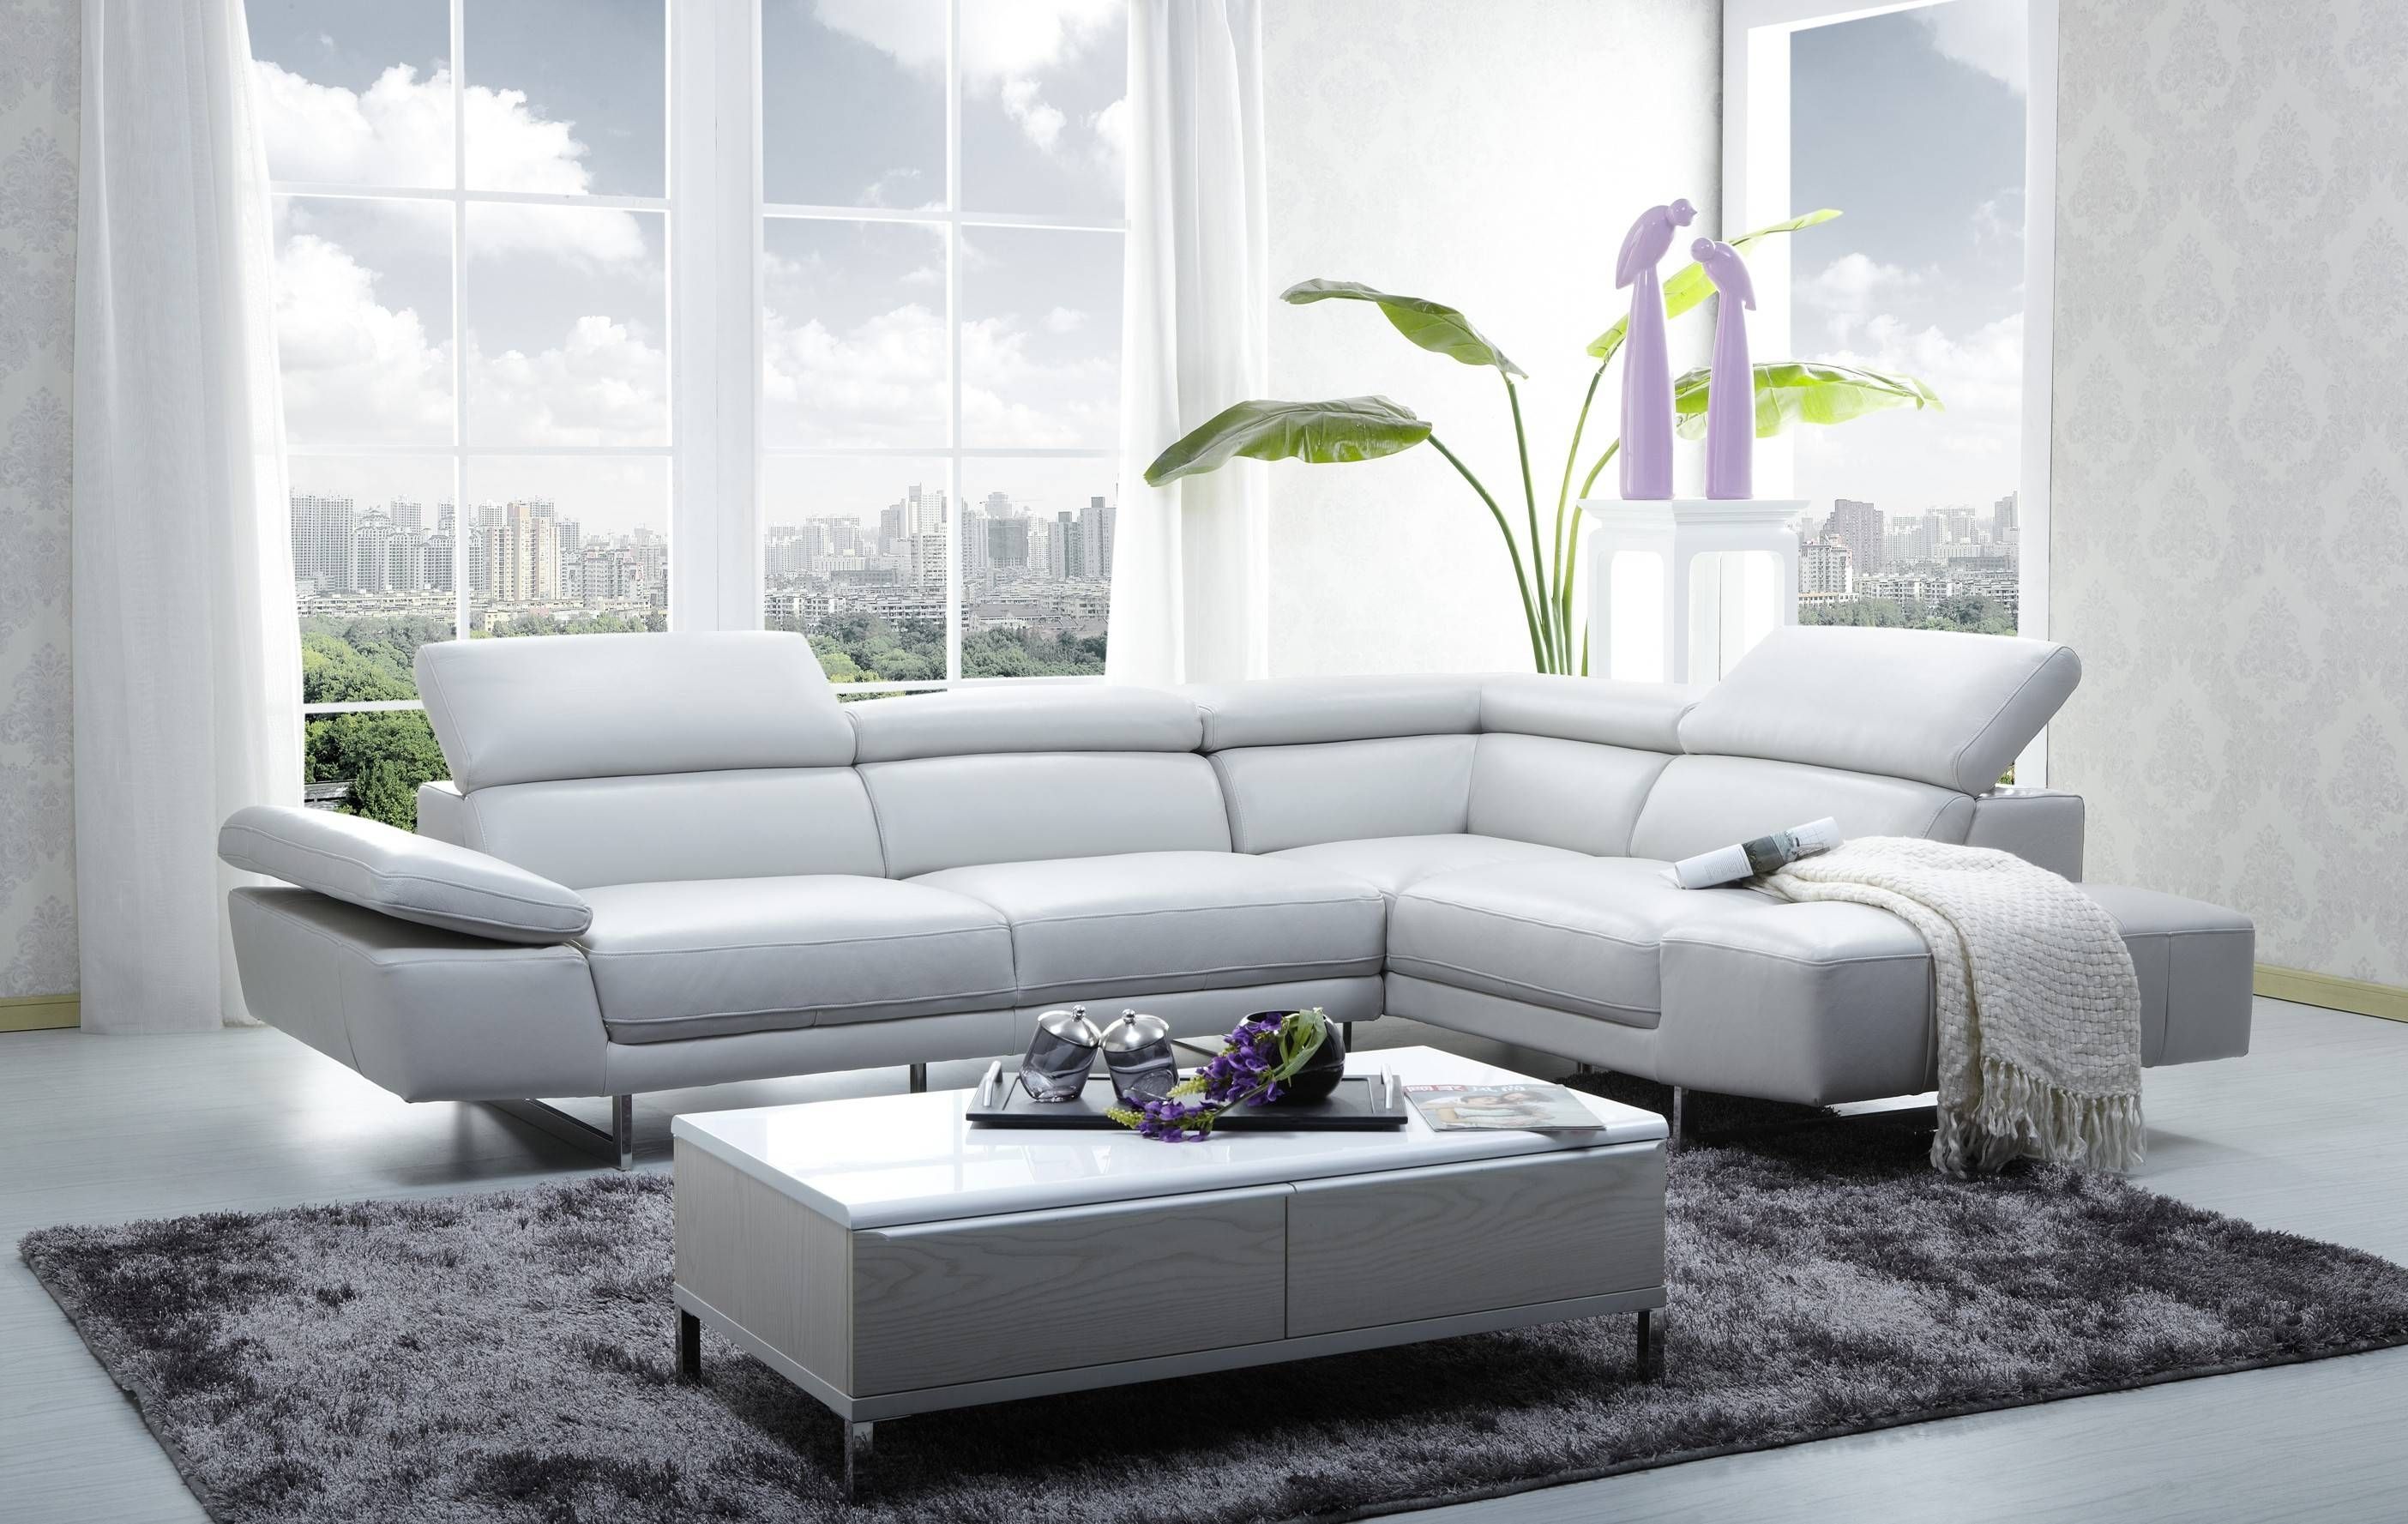 Small Apartment Design Interior With White Sectional Sofa Beds Throughout Modern Sofas (View 10 of 15)